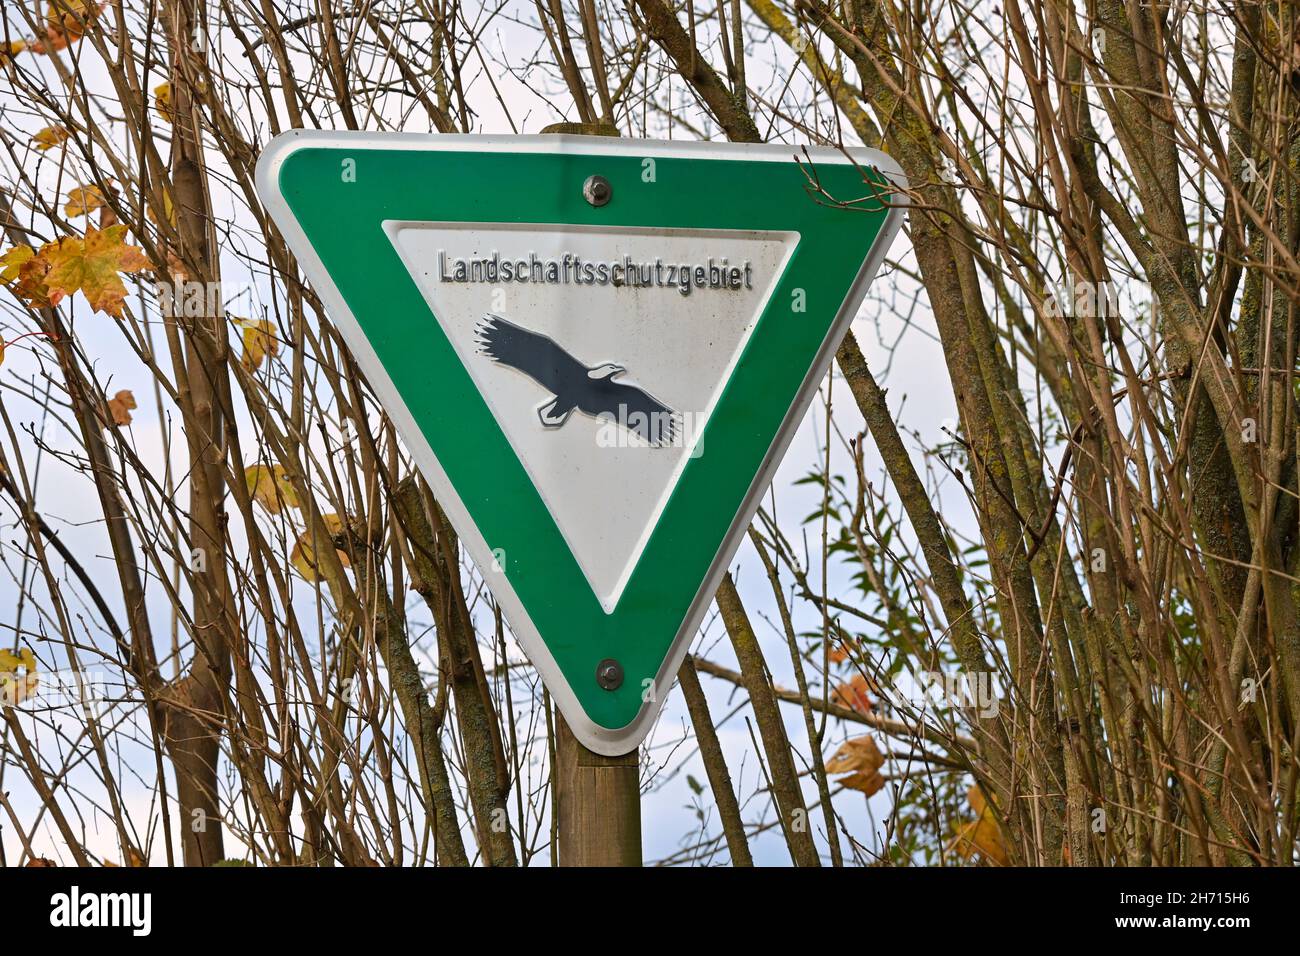 Landschaftsschutzgebiet, nature preserve area in Germany. Green sign with black eagle indicating a landscape reserve. Landscape protection area. Stock Photo